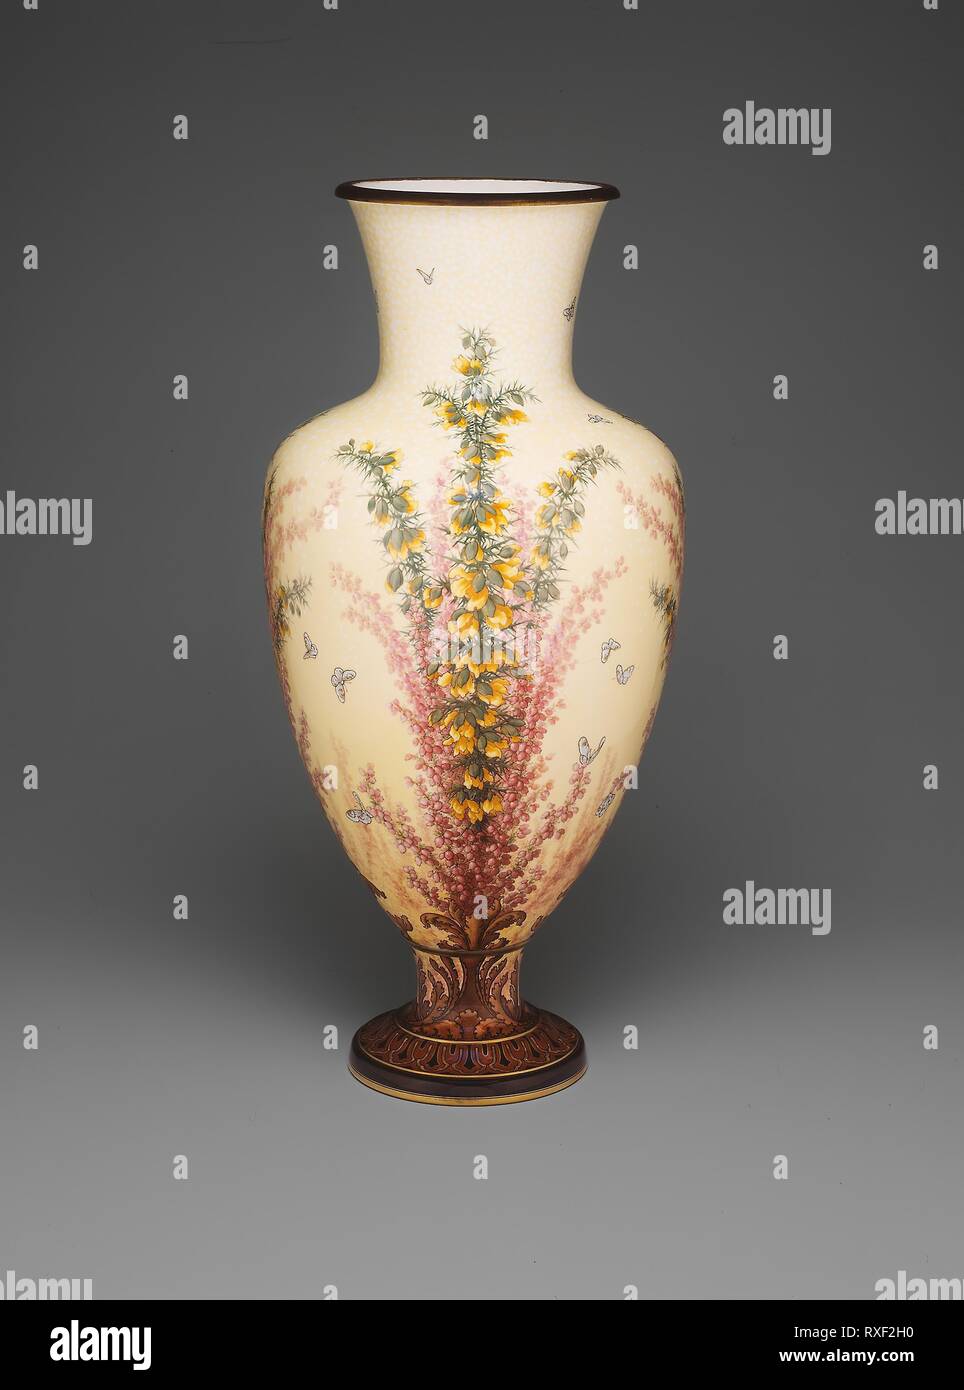 Vase d'Arezzo. Sèvres Porcelain Manufactory; Sèvres, France, founded 1740; Designed by Albert-Ernest Carrier-Belleuse (French, 1824-1887); Decorated by Henri Lucien Lambert (French, 1836-1909). Date: 1884-1885. Dimensions: H. 85 cm (33 1/2 in.). Hard-paste porcelain, polychrome enamels, and gilding, with copper alloy mounts. Origin: Sèvres. Museum: The Chicago Art Institute. Author: Manufacture nationale de Sevres. Stock Photo